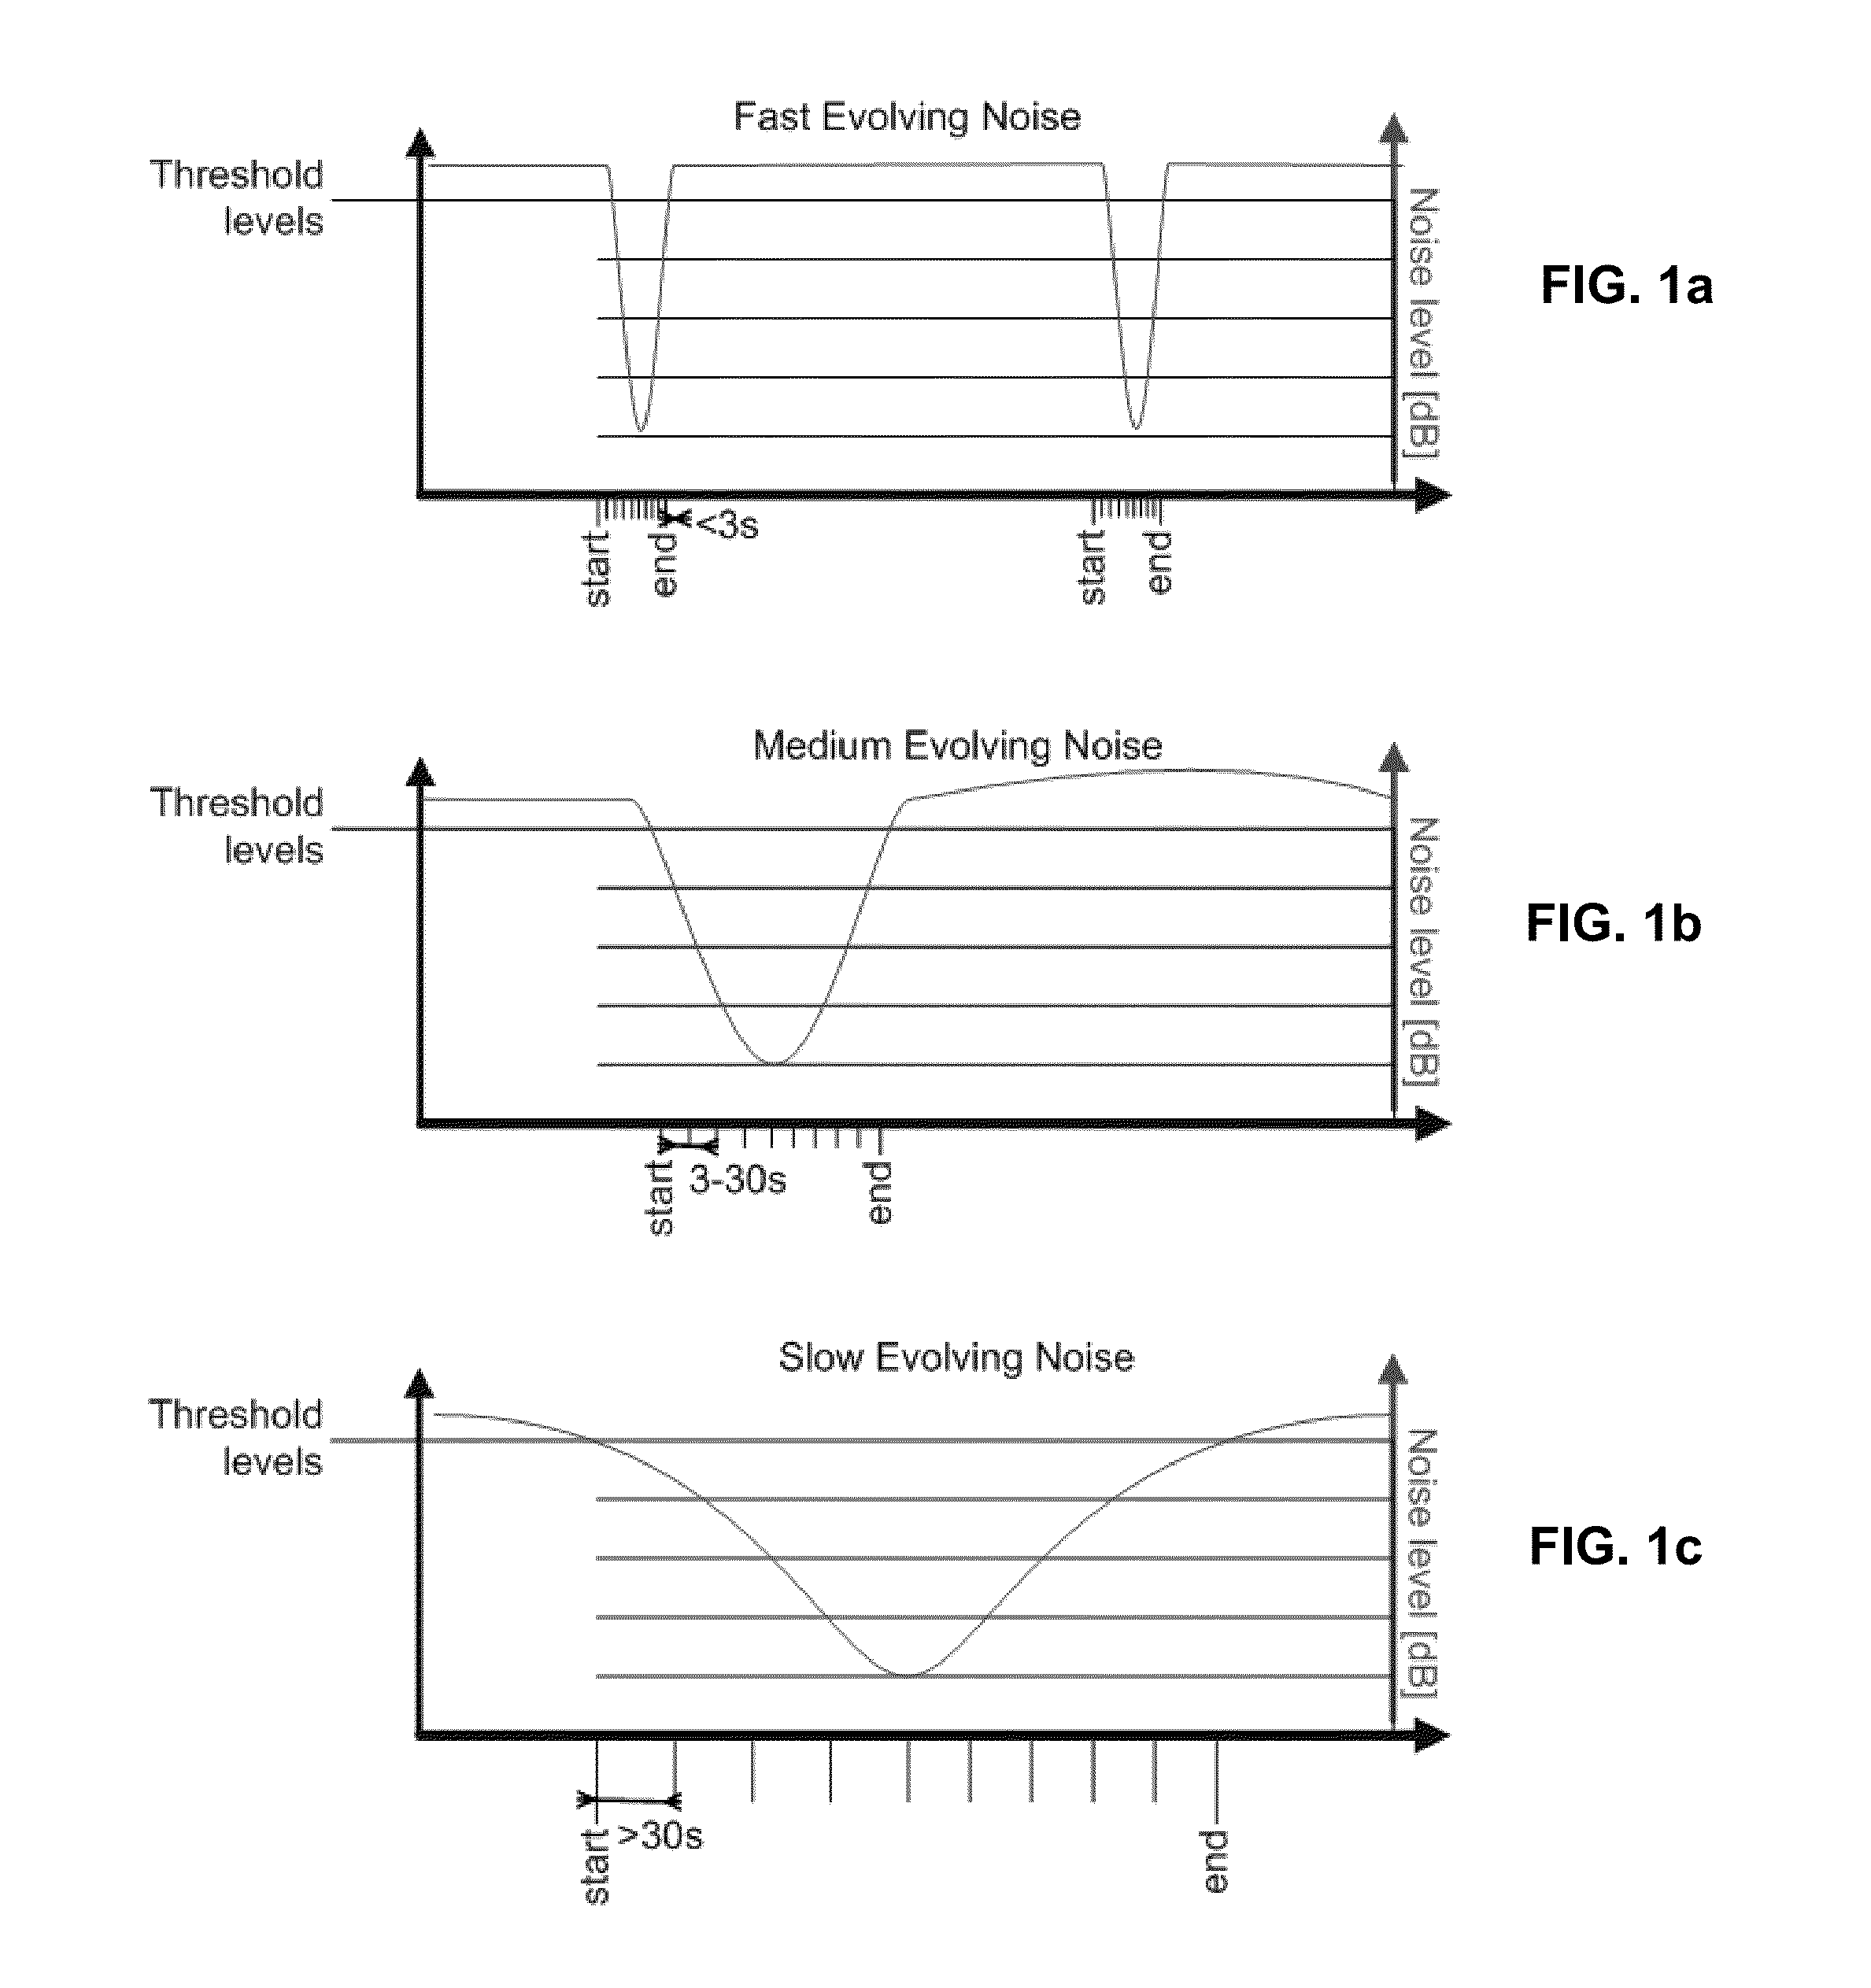 Method and apparatus for detecting and analyzing noise and other events affecting a communication system